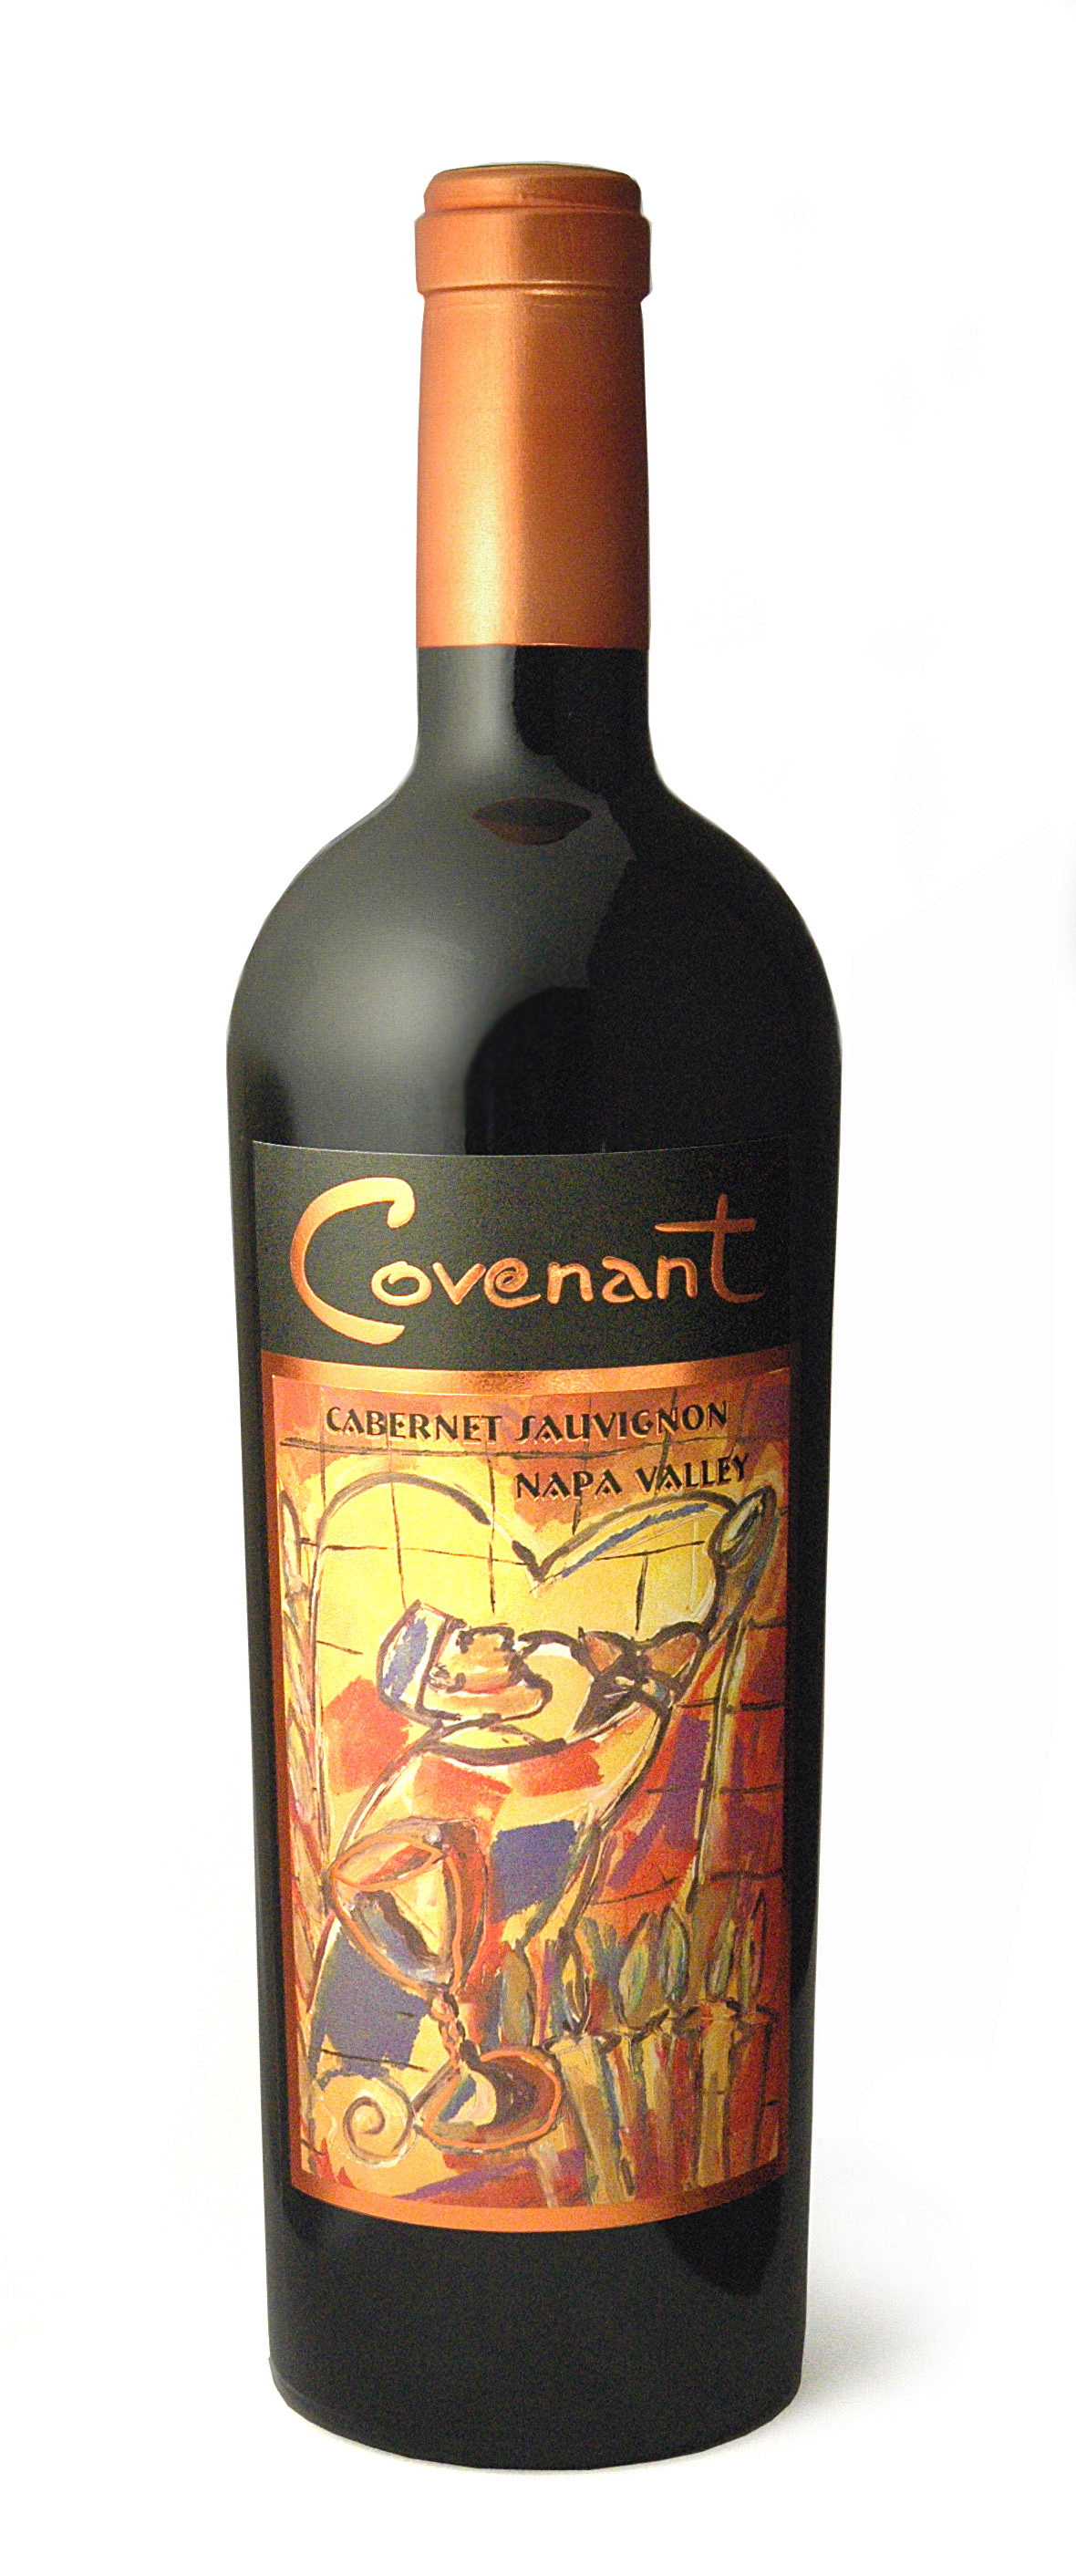 Covenant Wines
Cabernet Sauvignon from Covenant Wines vineyard in Napa Valley, Calif.